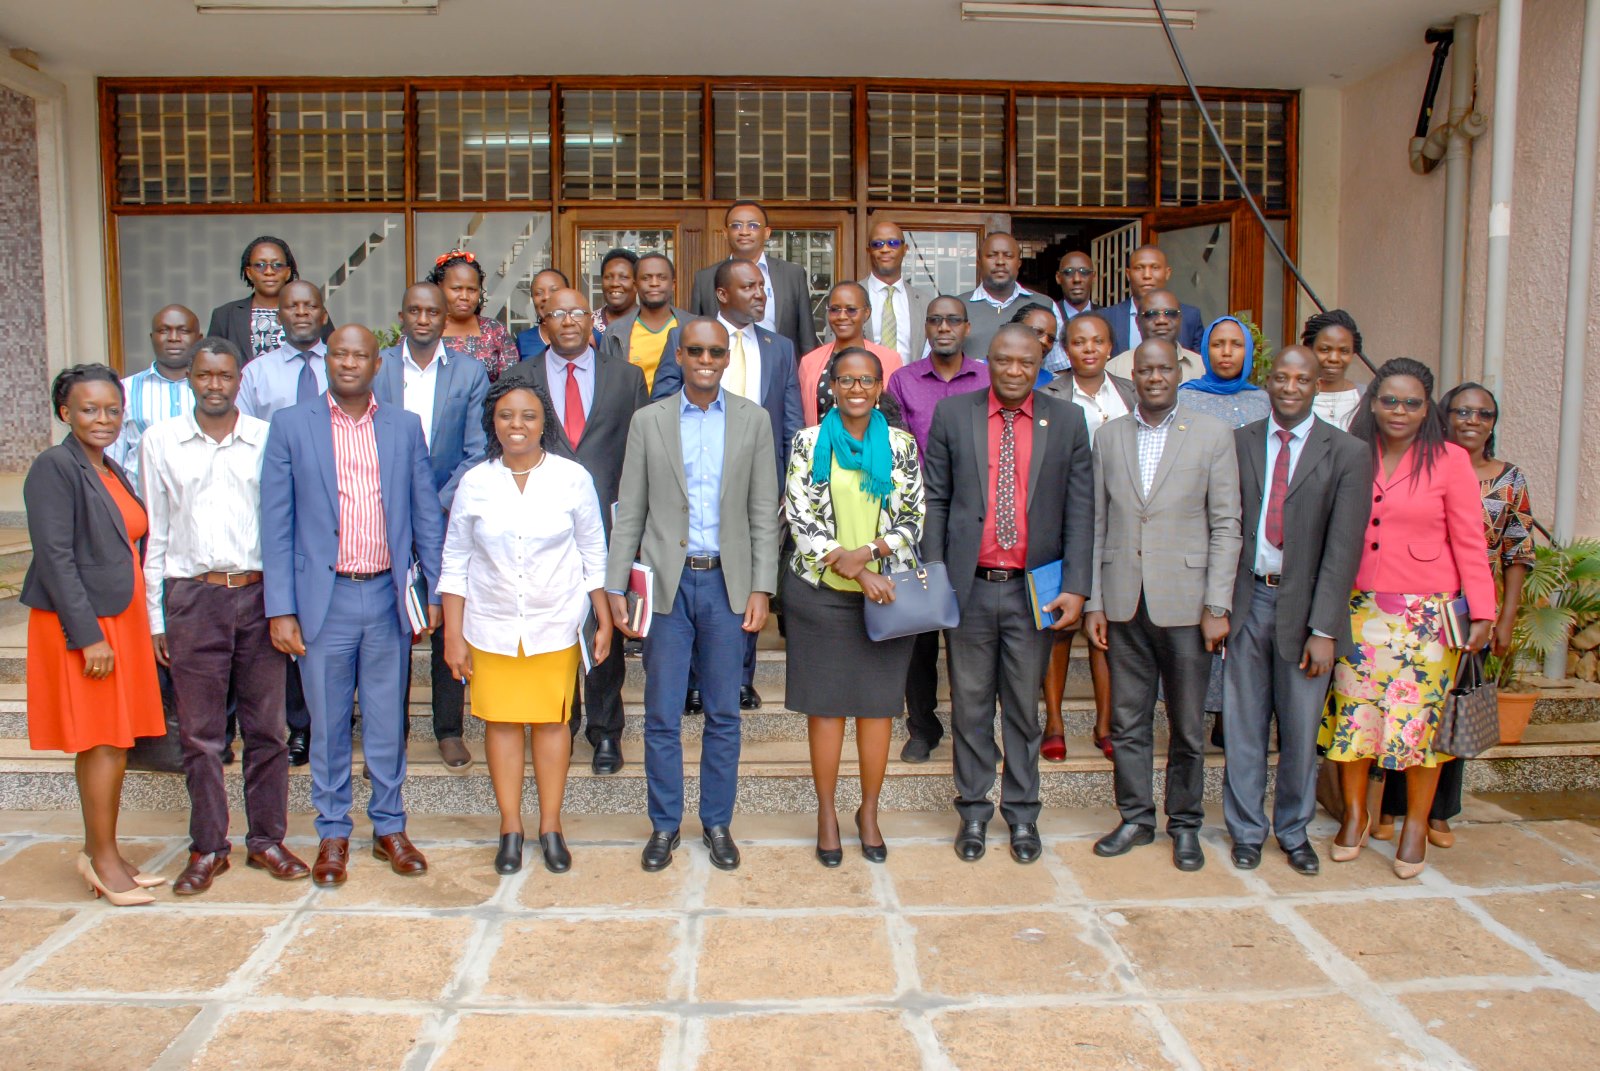 Front Row: The Chairperson Council-Mrs. Lorna Magara (5th R), Deputy Chairperson Council-Rt. Hon. Daniel Fred Kidega (3rd R), Principal MakCHS-Prof. Damalie Nakanjako (4th L), Deputy Principal MakCHS-Assoc. Prof. Isaac Kajja (4th R) with Members of Council and CHS Leadership after the meeting on 3rd March 2023, Sir Albert Cook Memorial Library, MakCHS, Makerere University, Mulago Hill.